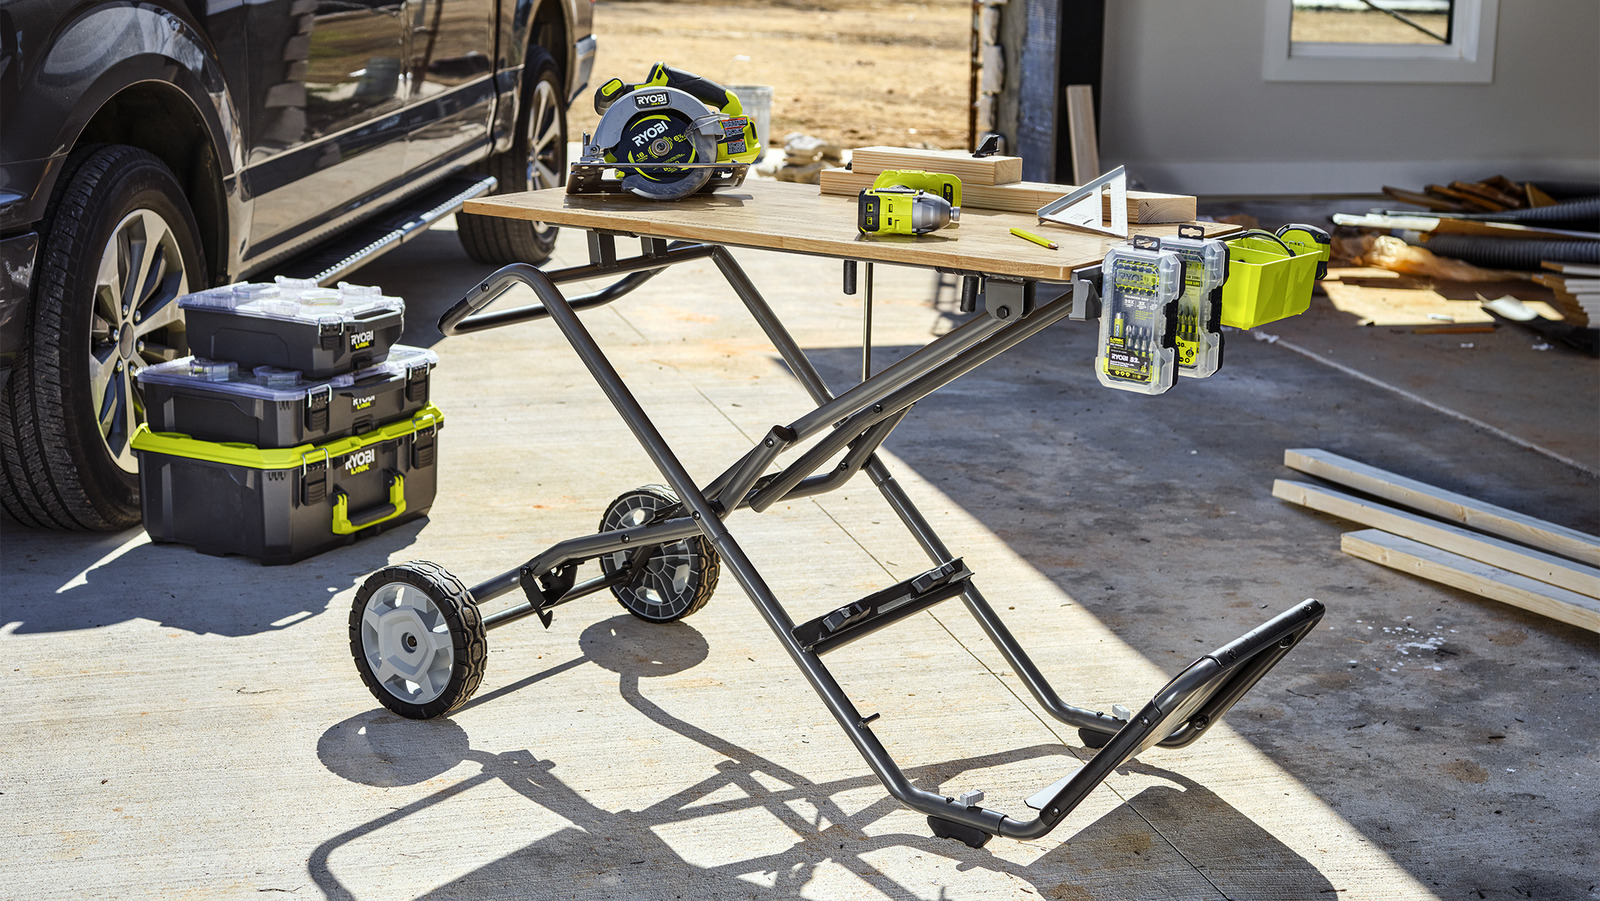 Is Ryobi Speed Bench The Next Workstation Craze? What It Is & How To Buy